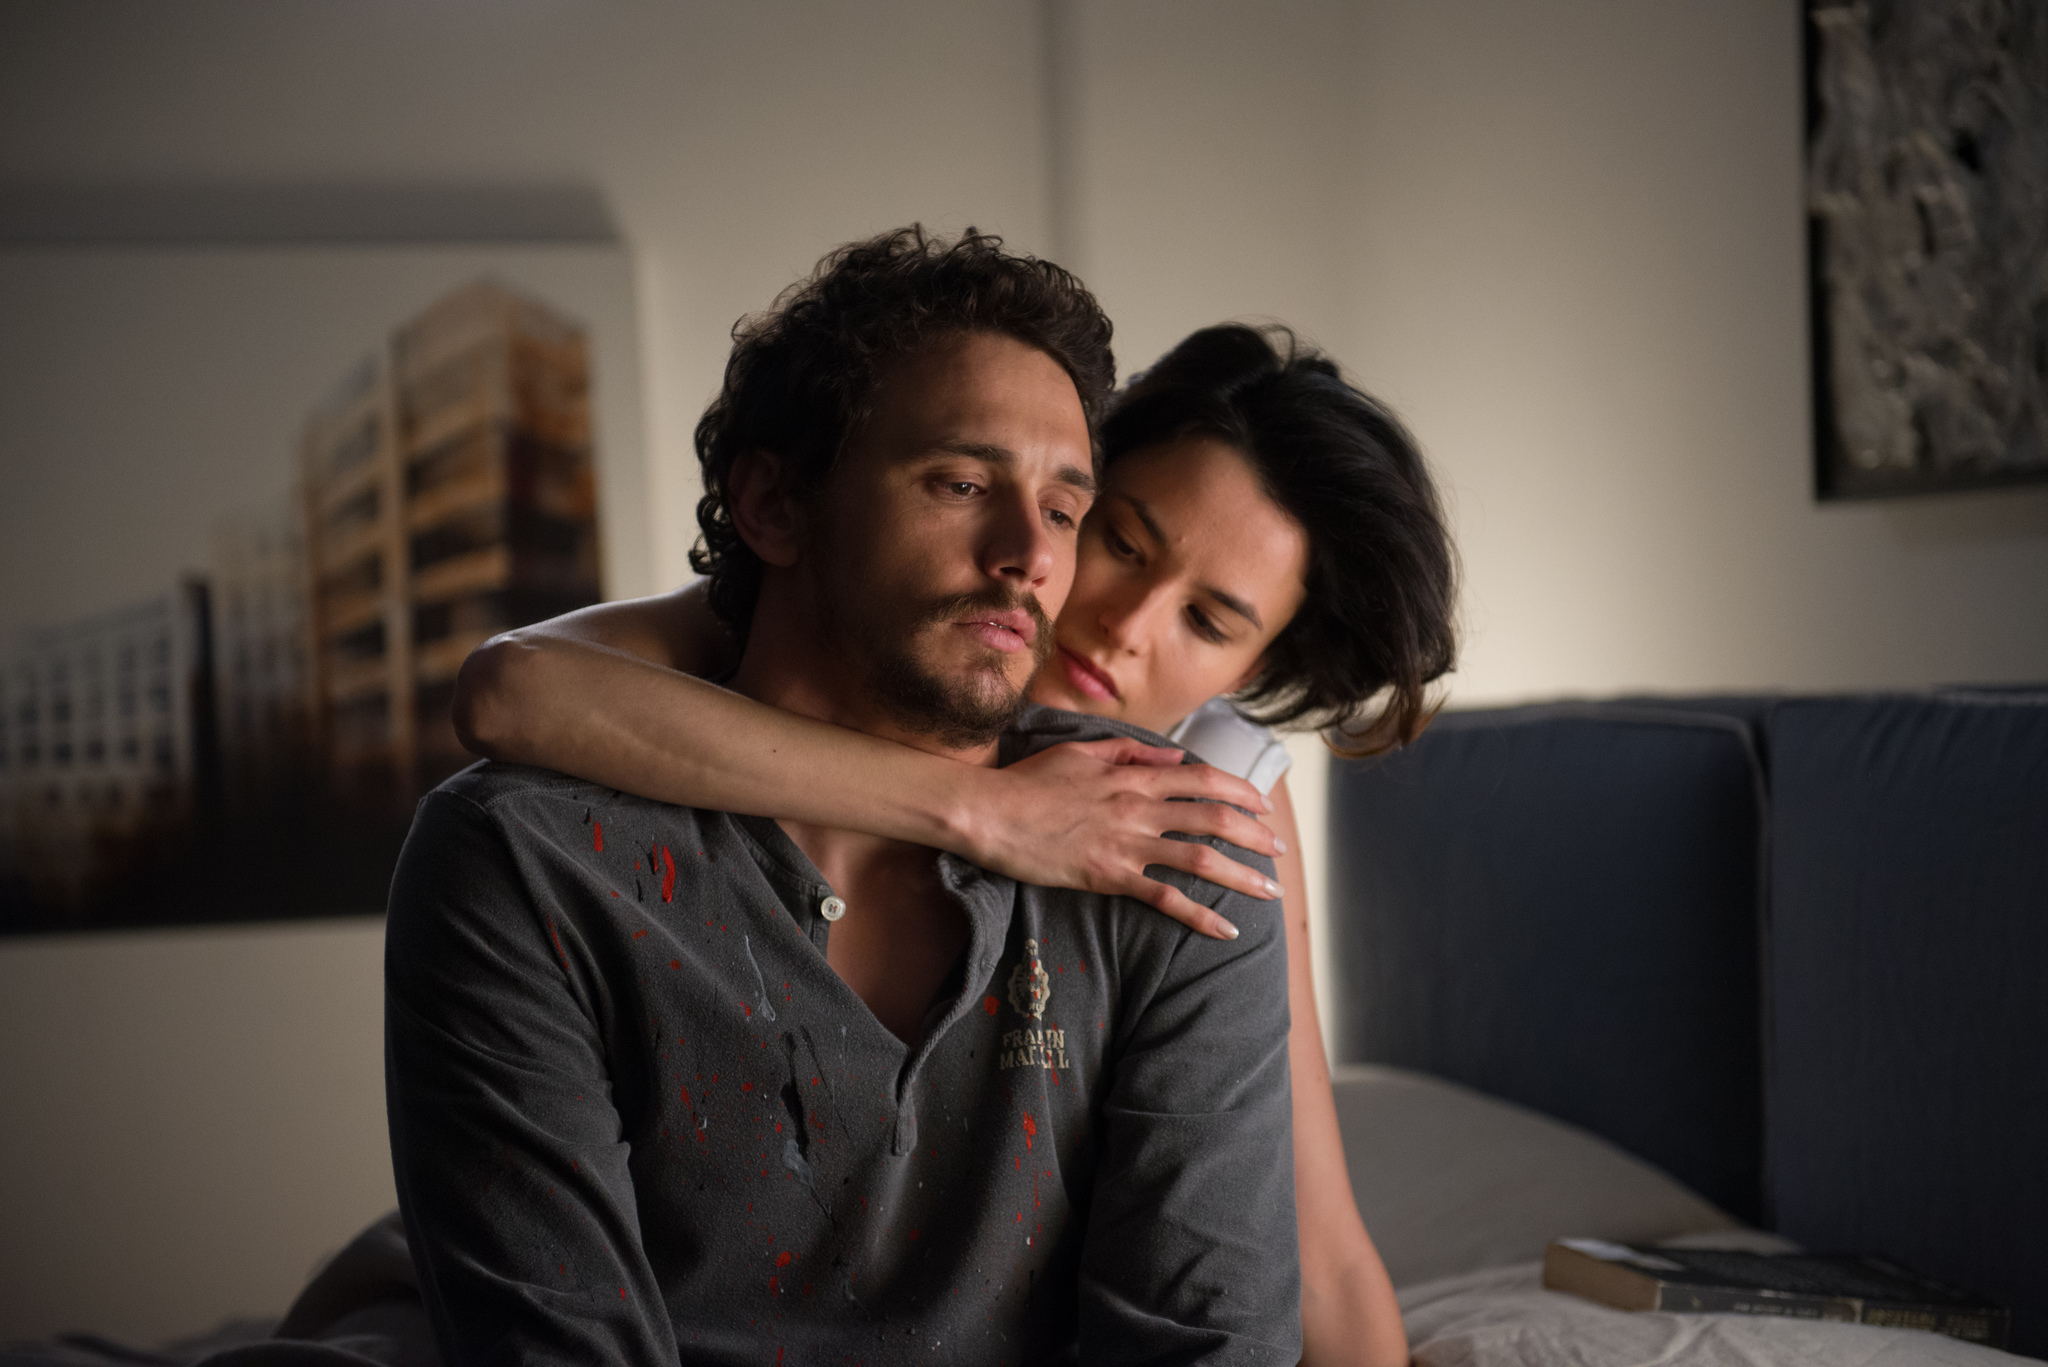 Still of James Franco and Loan Chabanol in Trecias zmogus (2013)